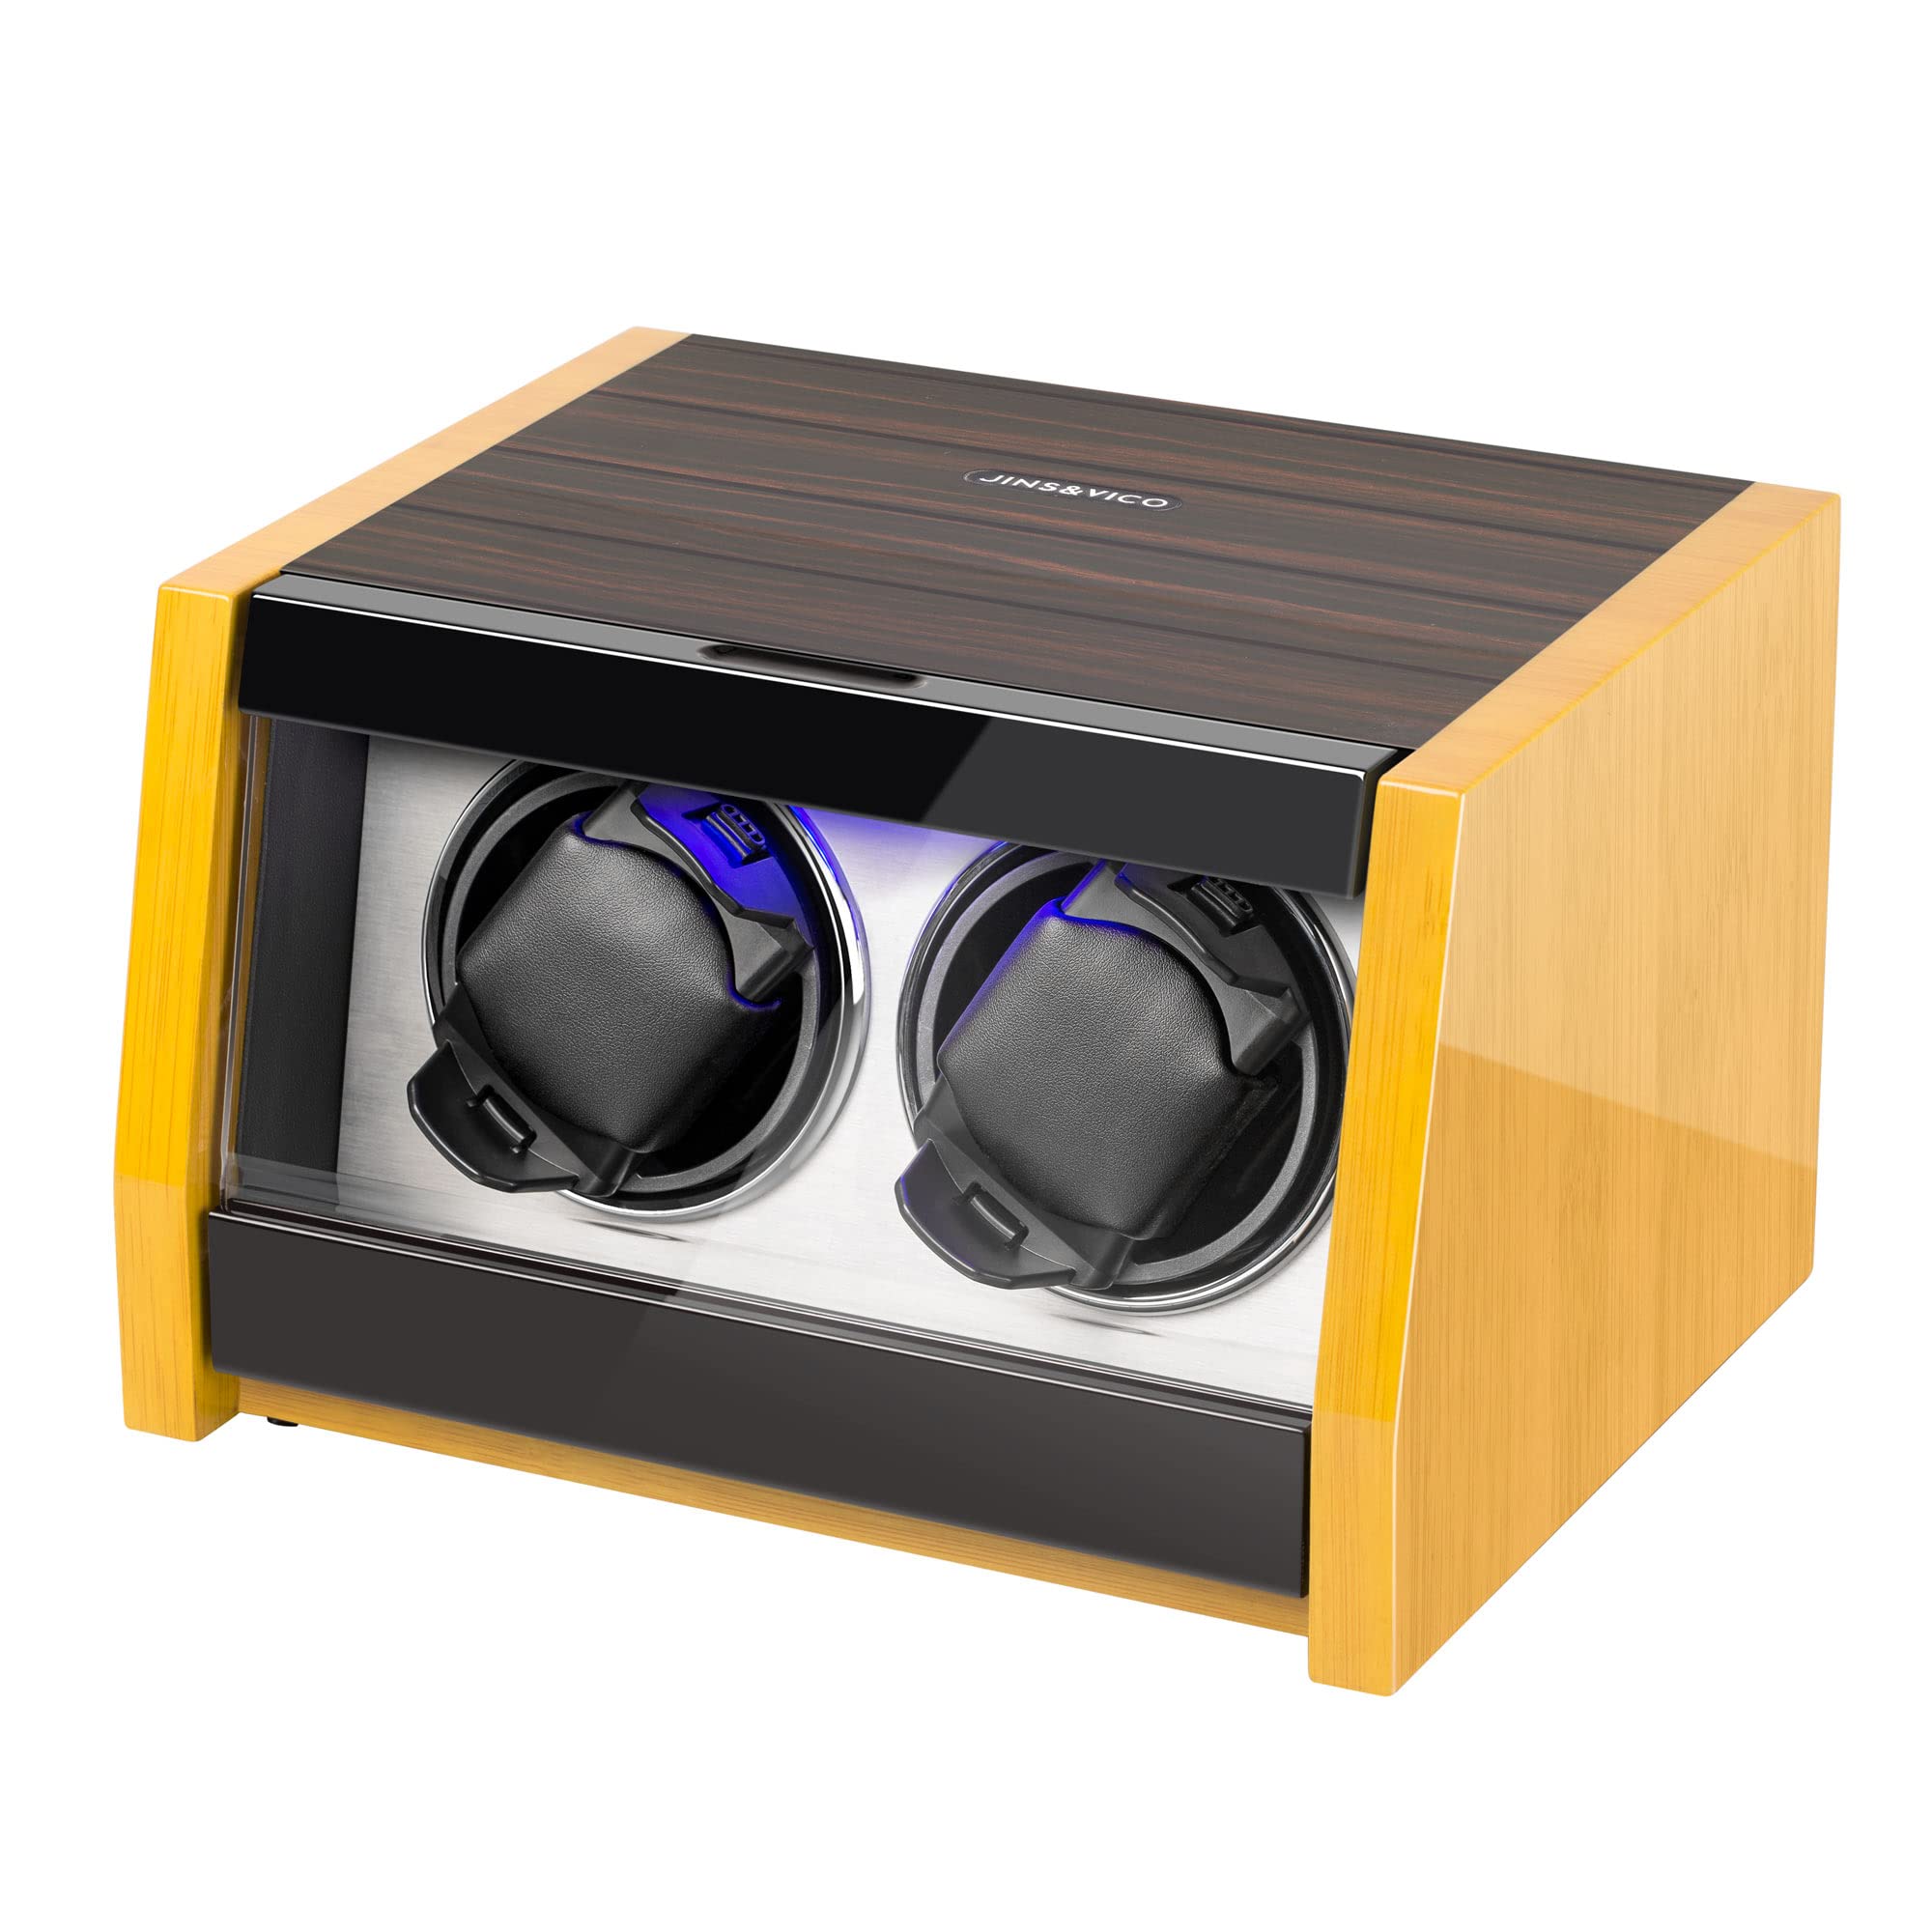 Watch Winder Made of Premium Natural Bamboo Shell for 6 Automatic Watches with High-Gloss Craftsmanship, 4 Setting Modes and Super Quiet Motor, Built-in Lock